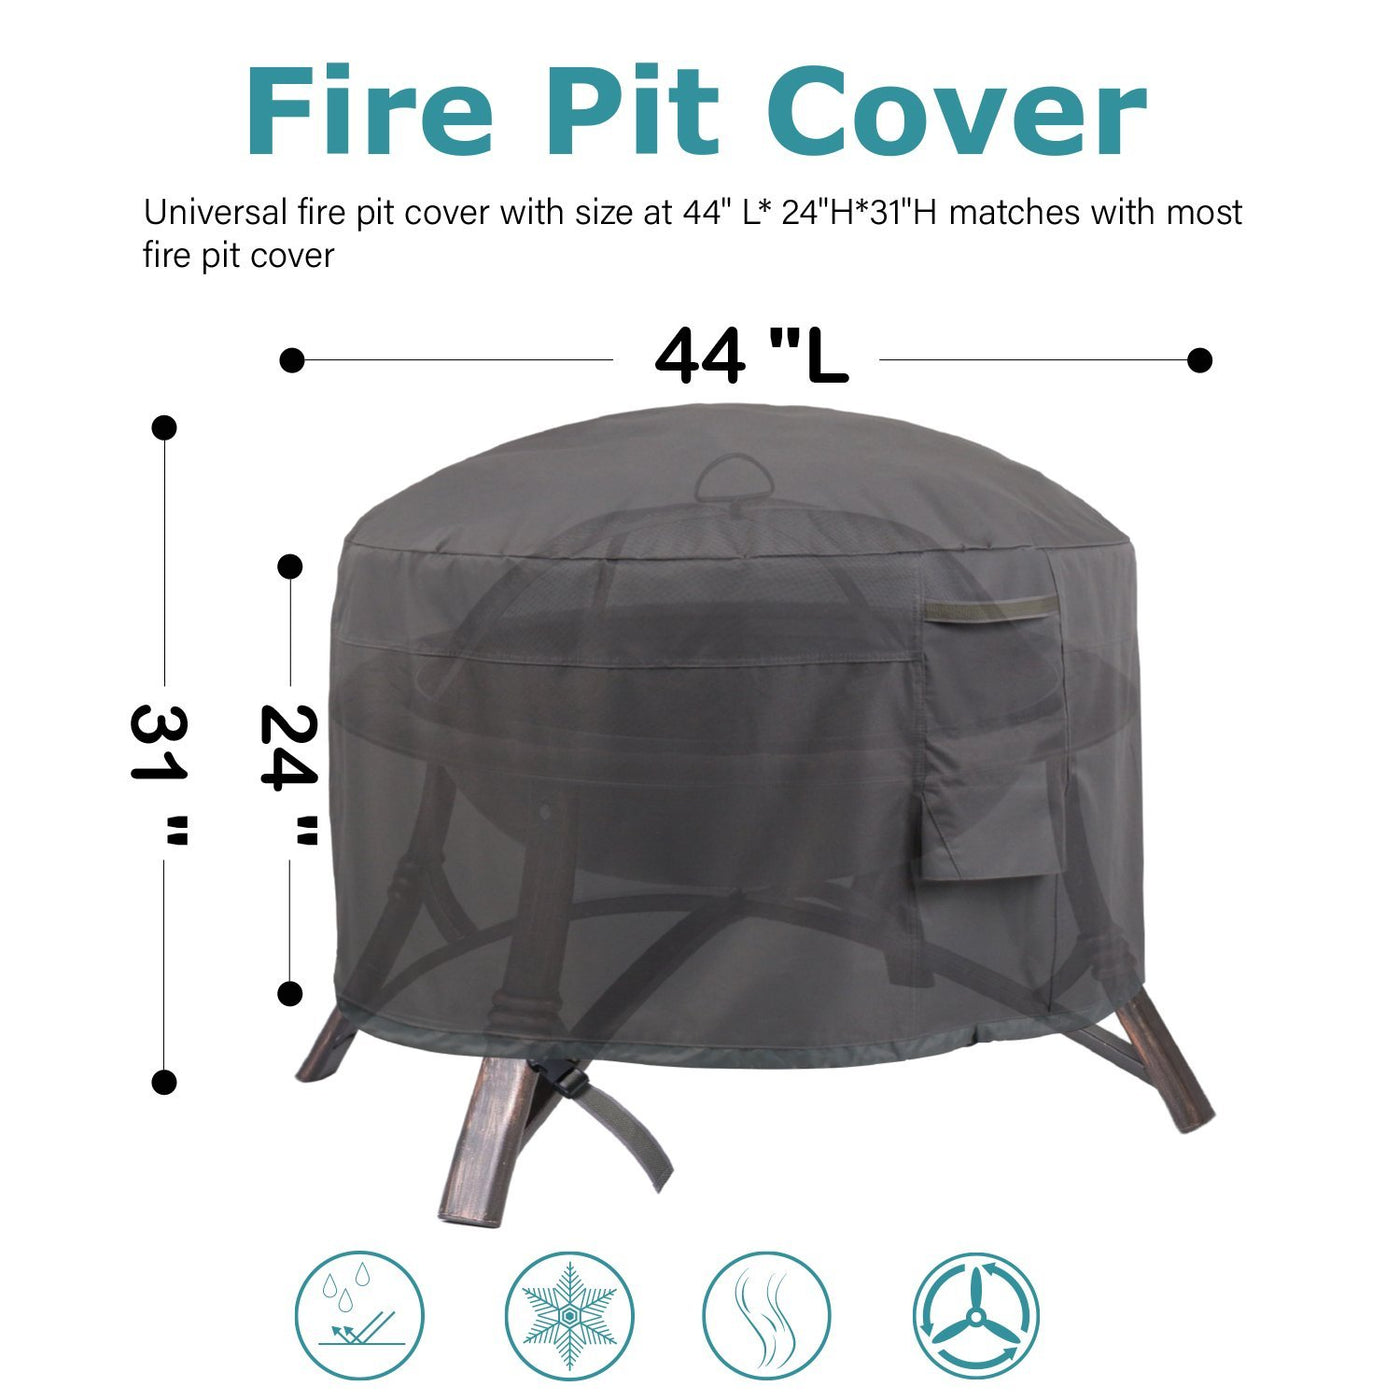 Full Coverage Round Fire Pit Cover - HOMEKOKO